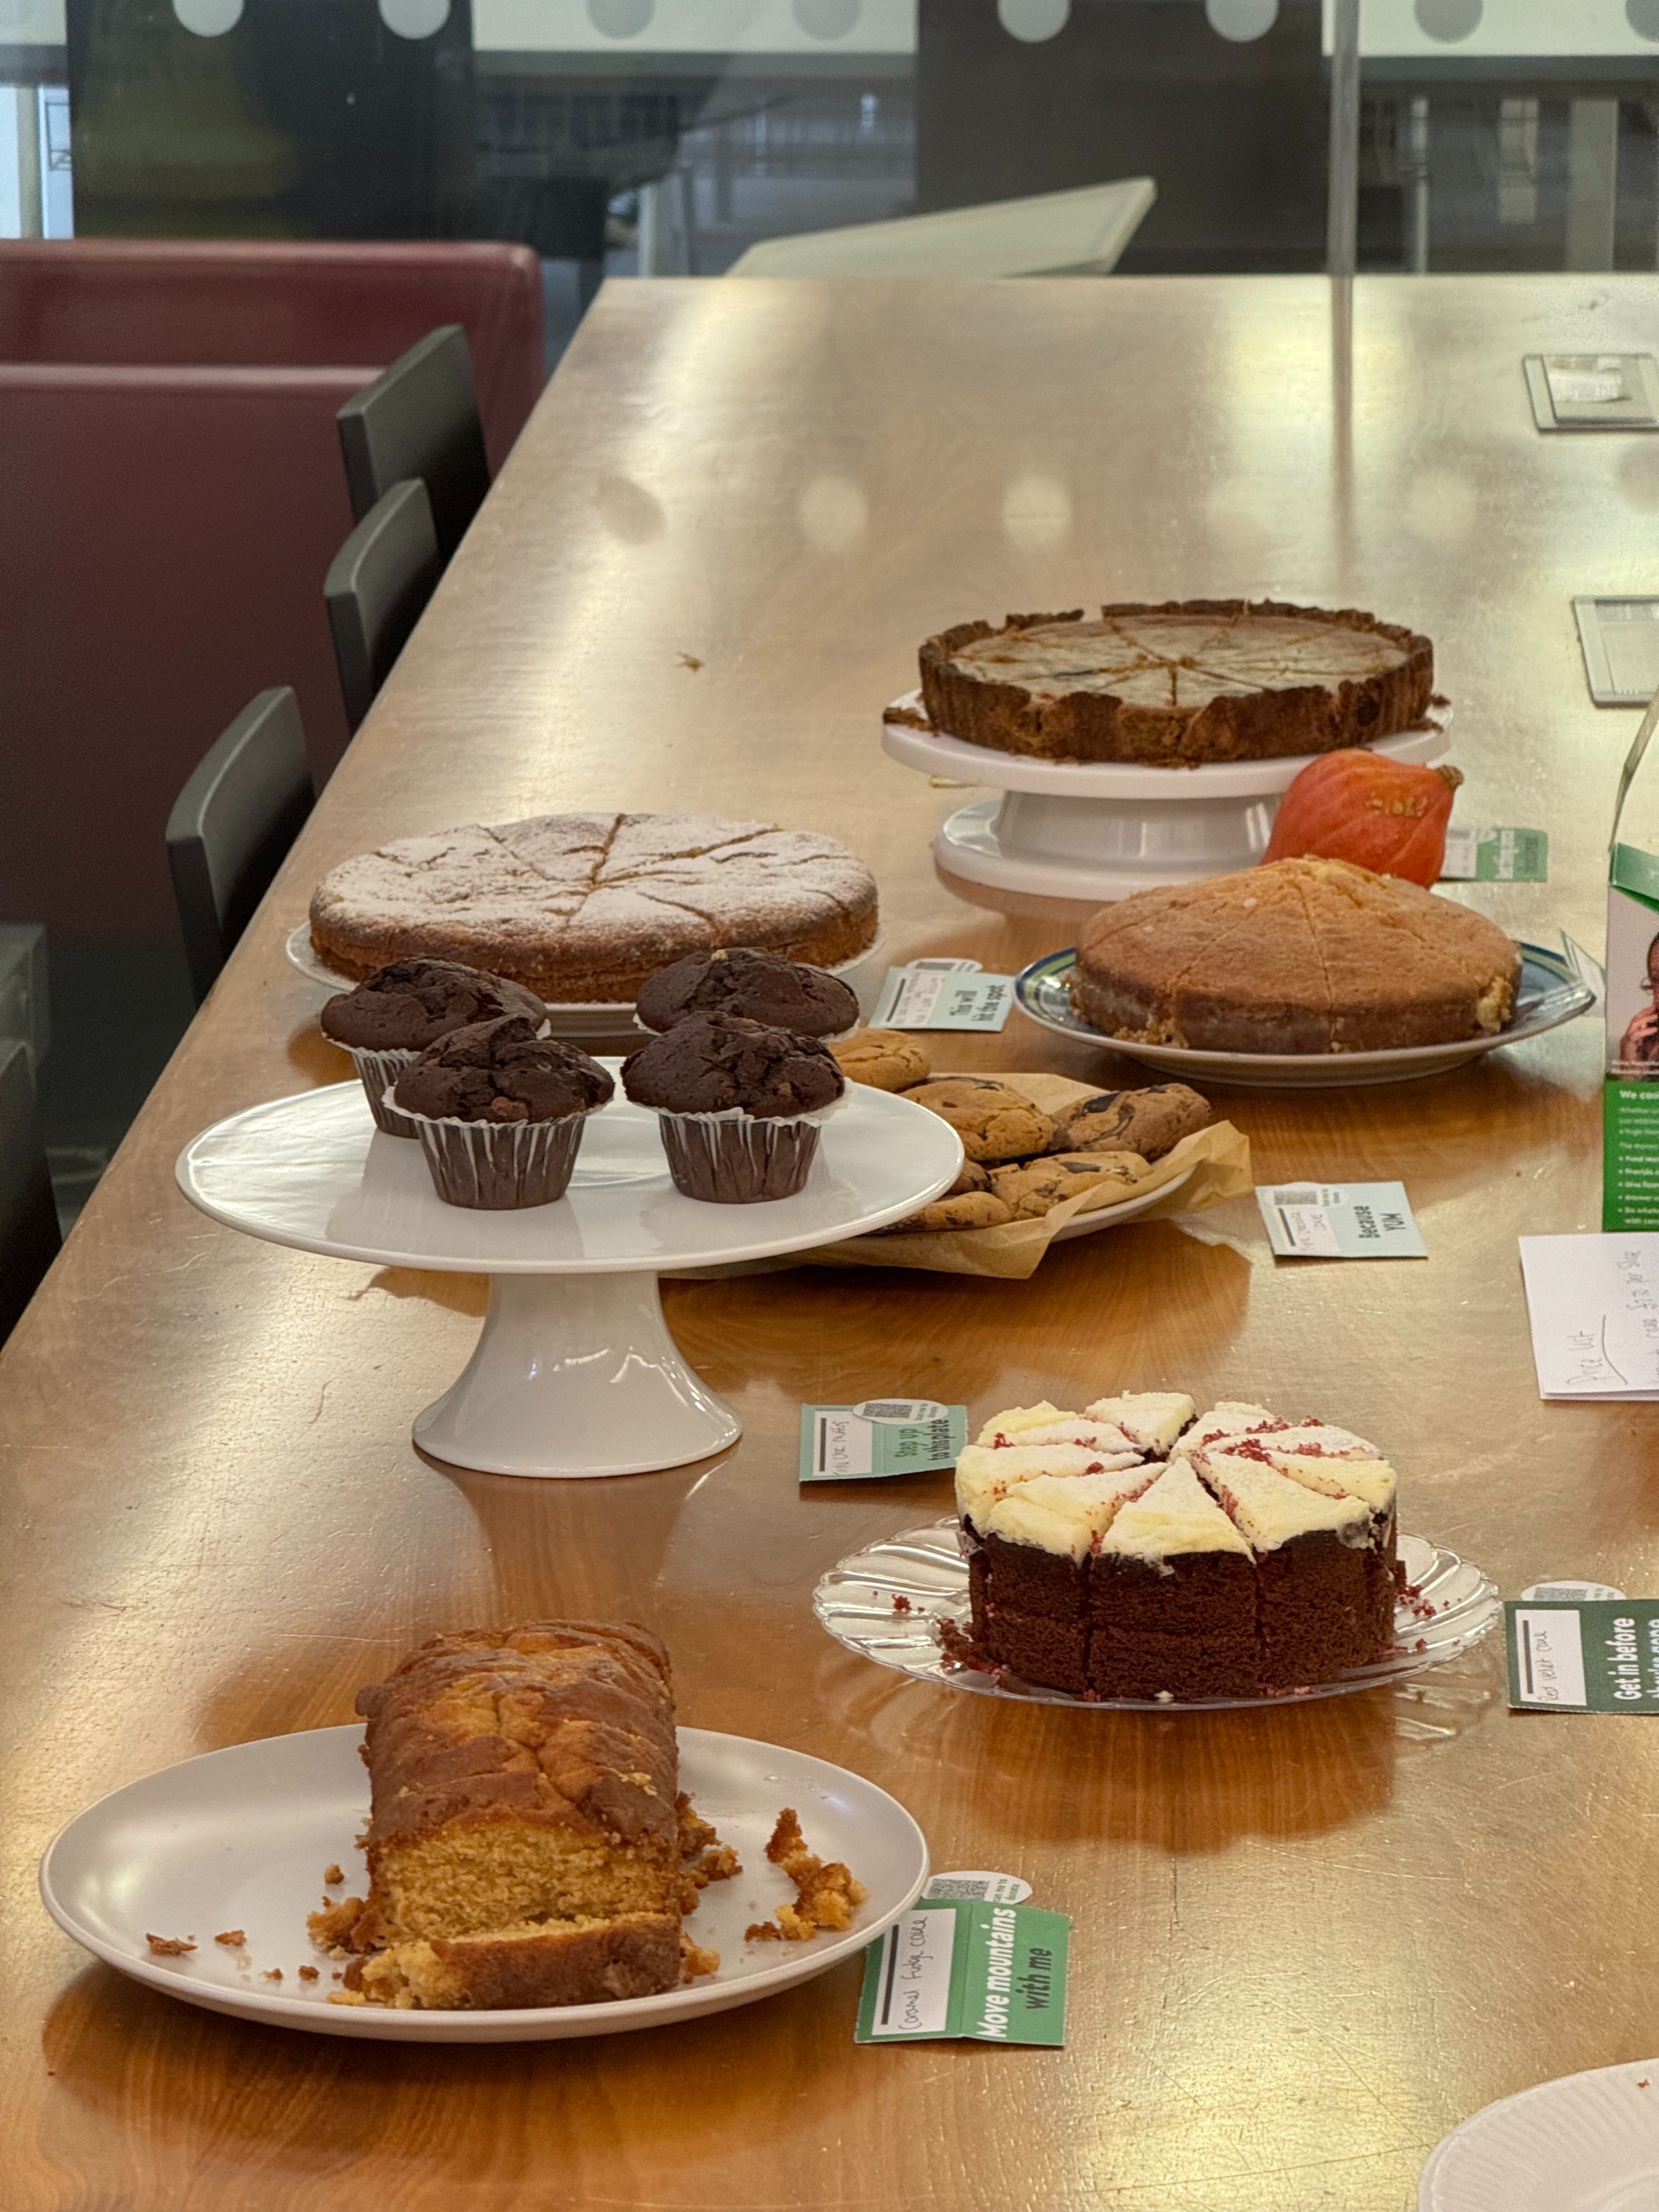 Table of homemade cakes for the Macmillan cancer support cake sale